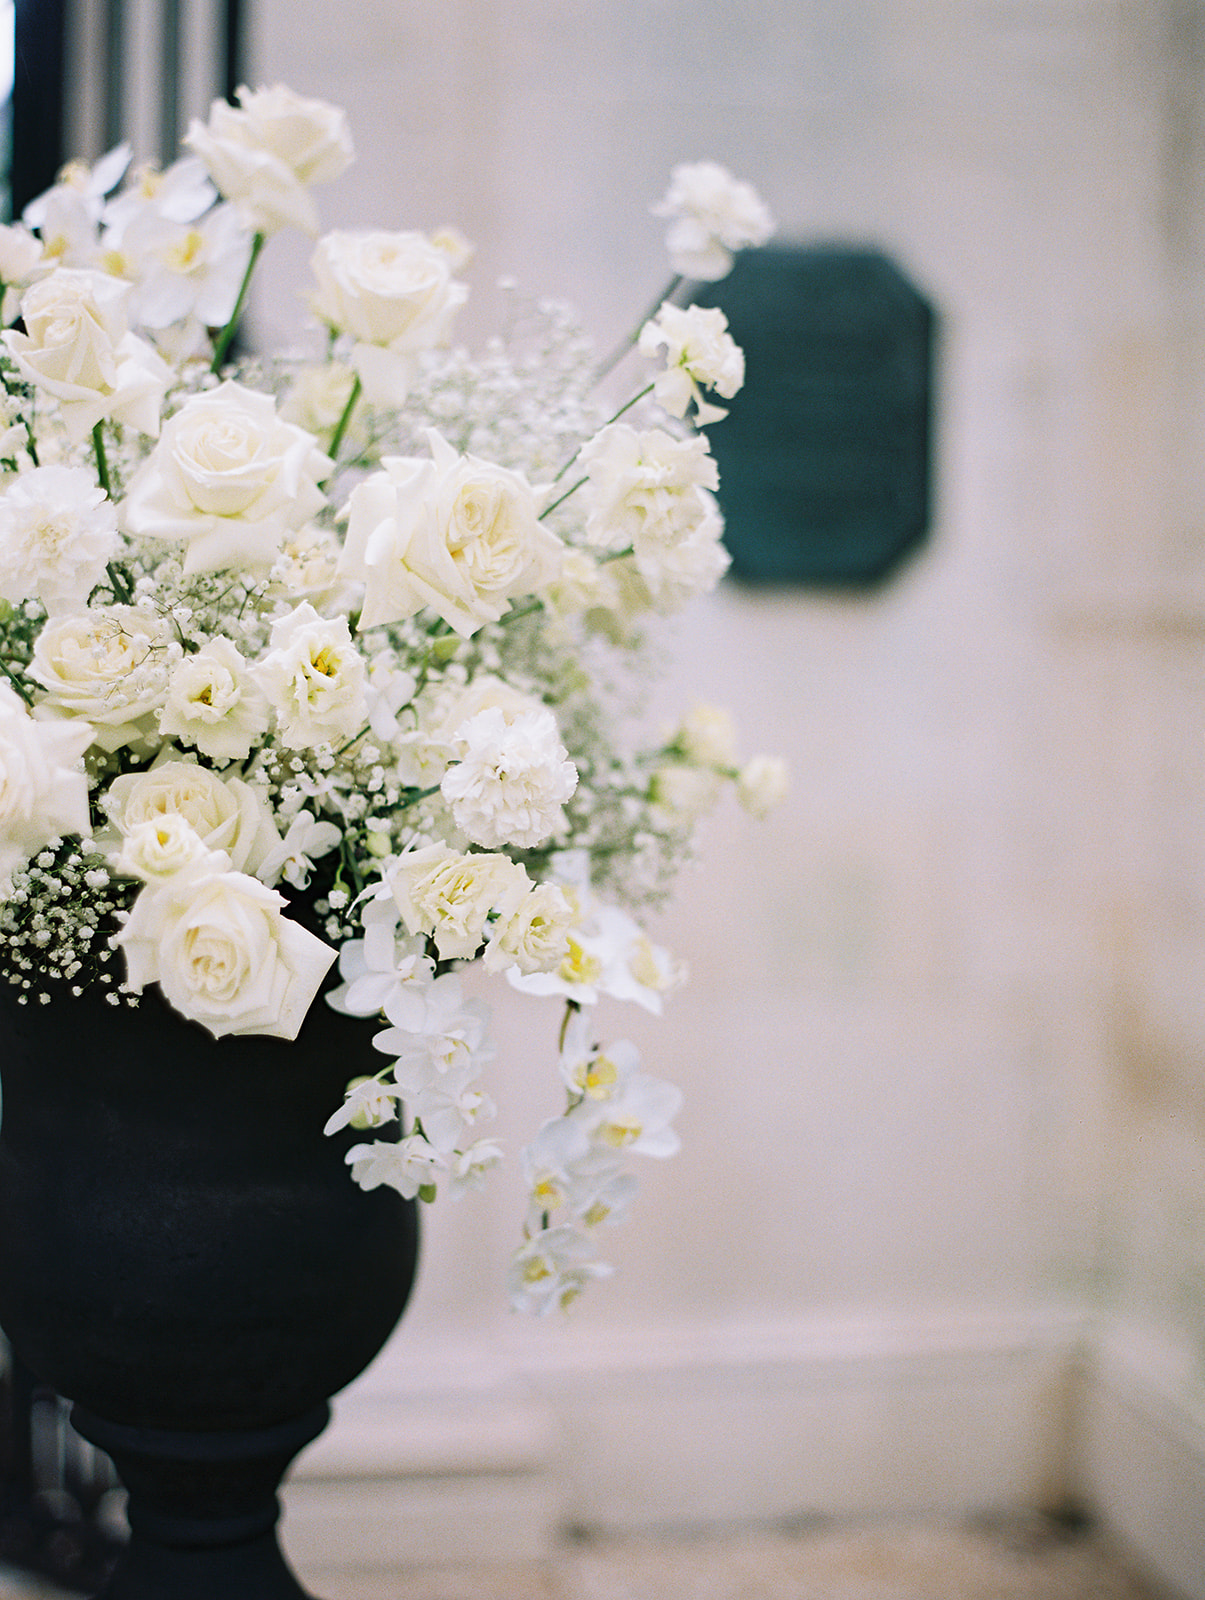 Closeup shot of ceremony arrangement in a black vase with white roses and white babies breath at Rodin Museum